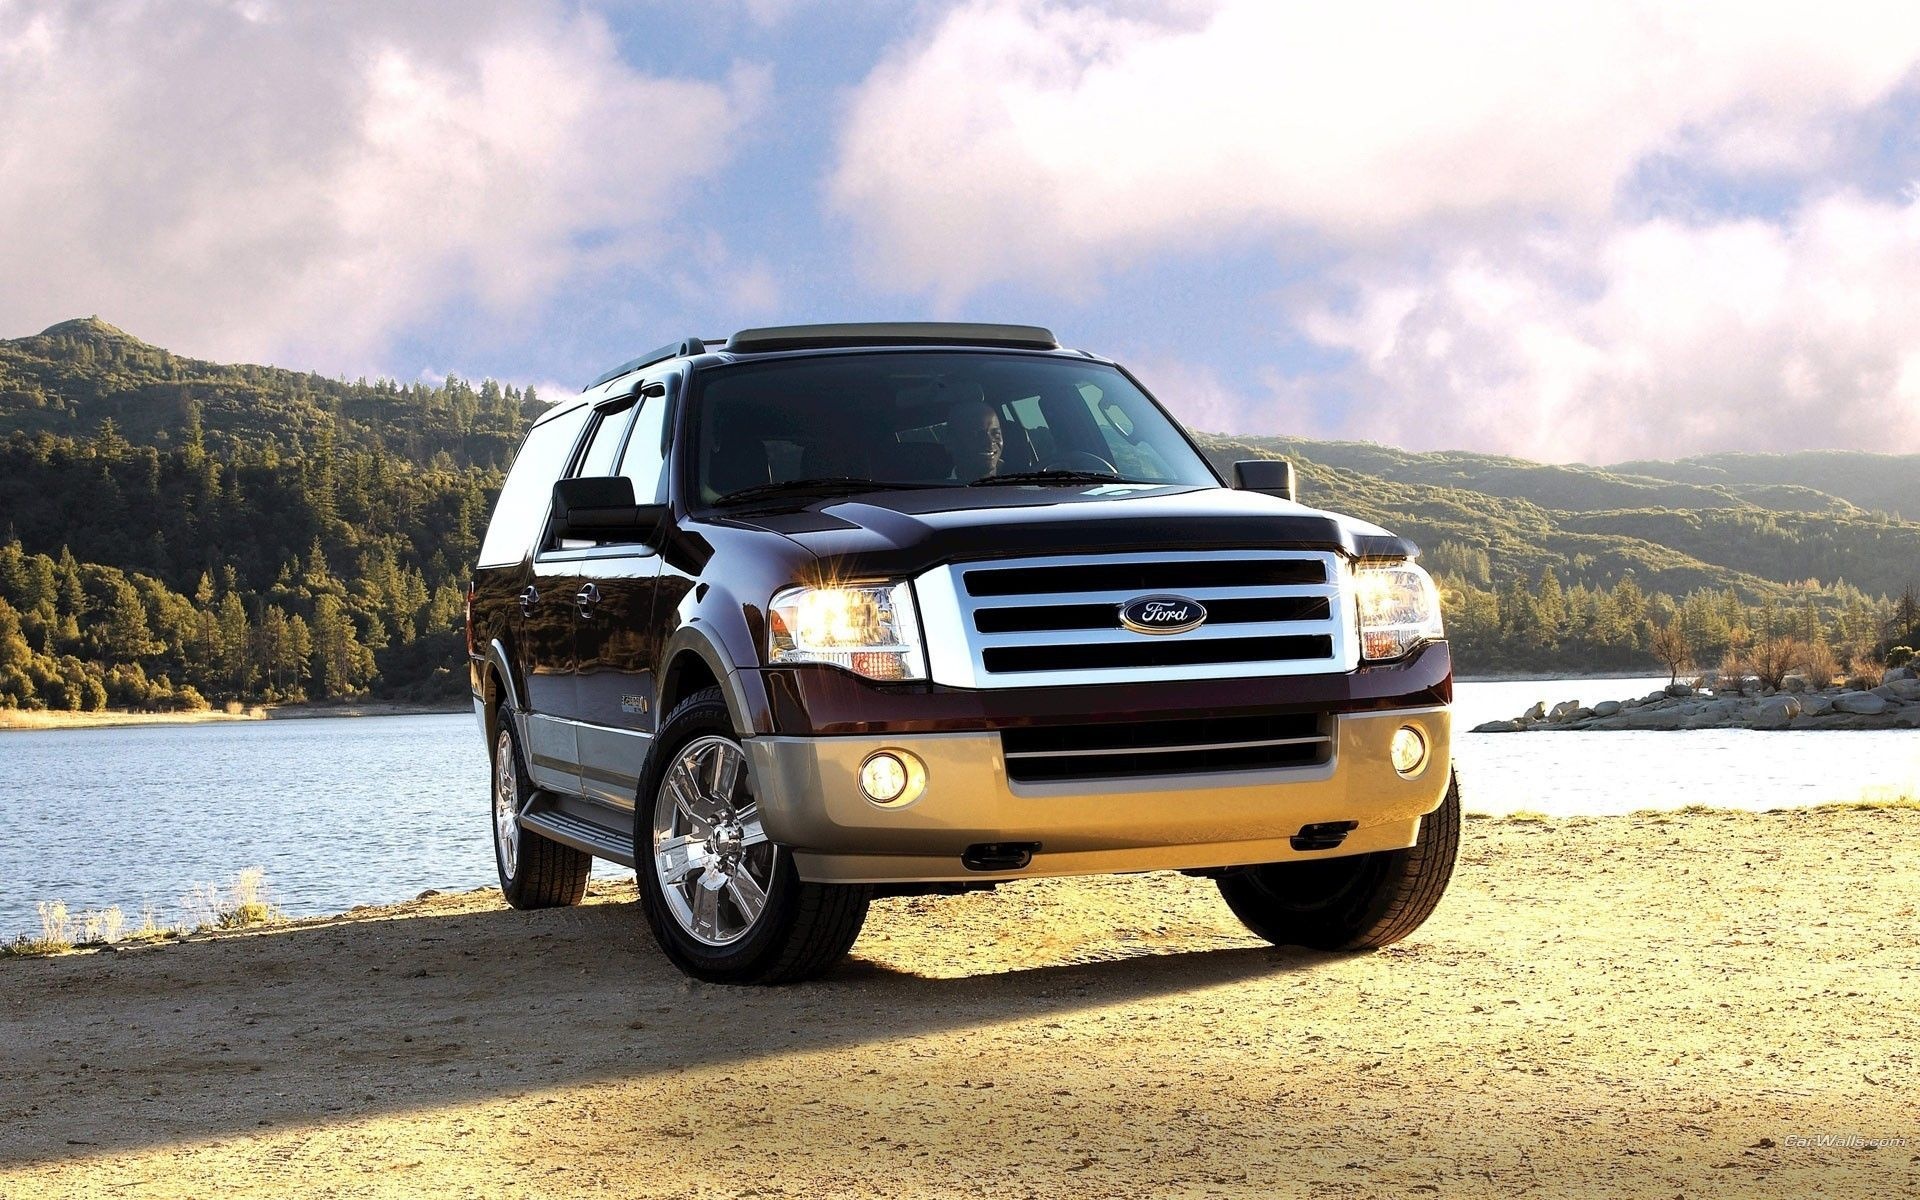 Ford Expedition, SUV cars, Camionetas familiares, Ford Expedition, 1920x1200 HD Desktop